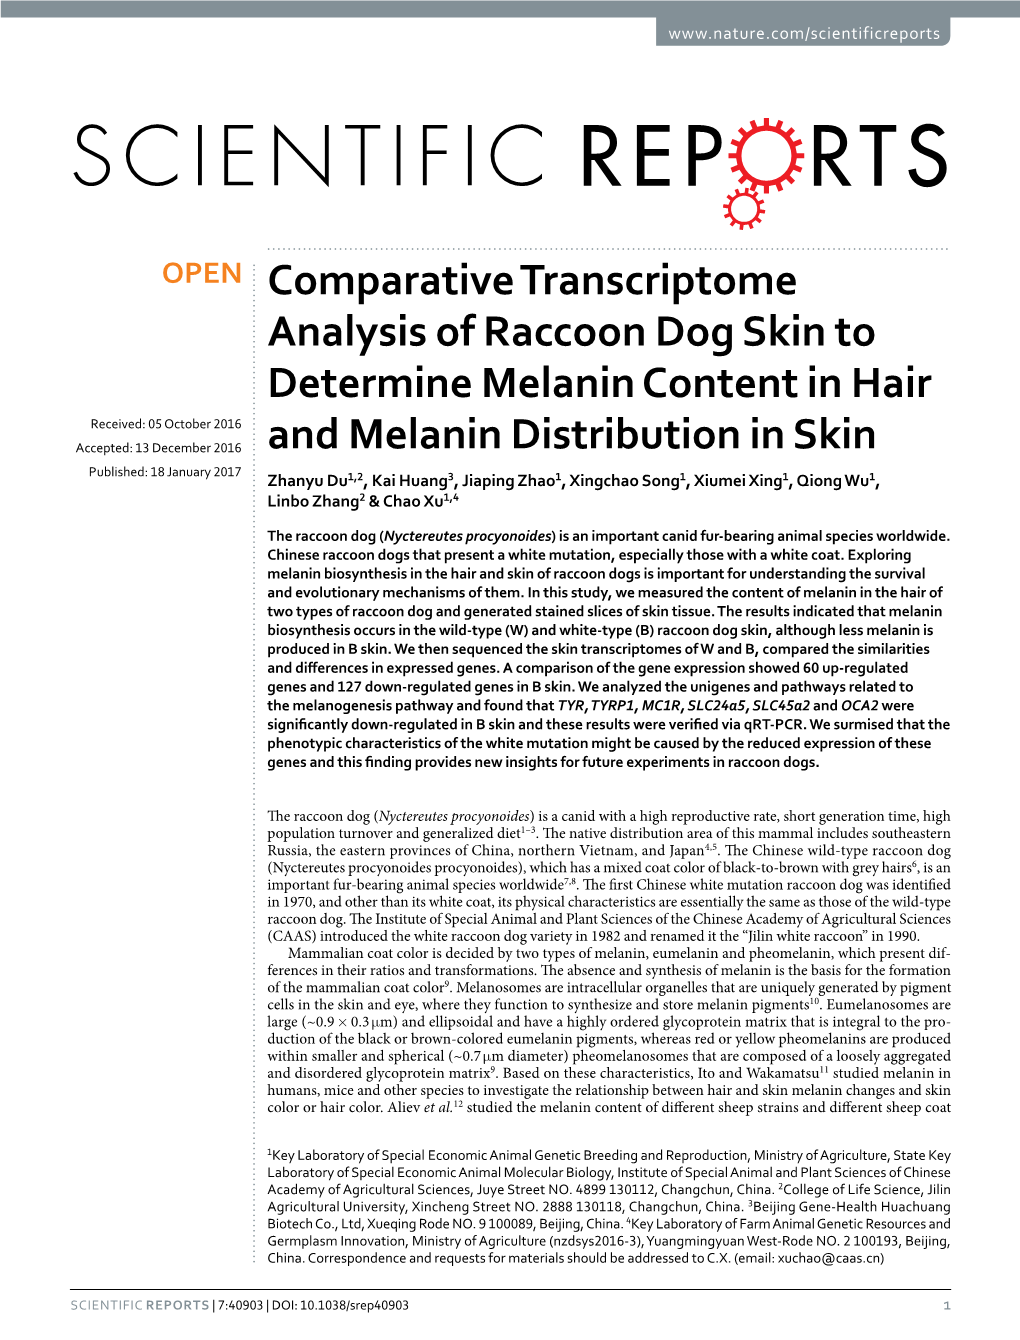 Comparative Transcriptome Analysis of Raccoon Dog Skin to Determine Melanin Content in Hair and Melanin Distribution in Skin